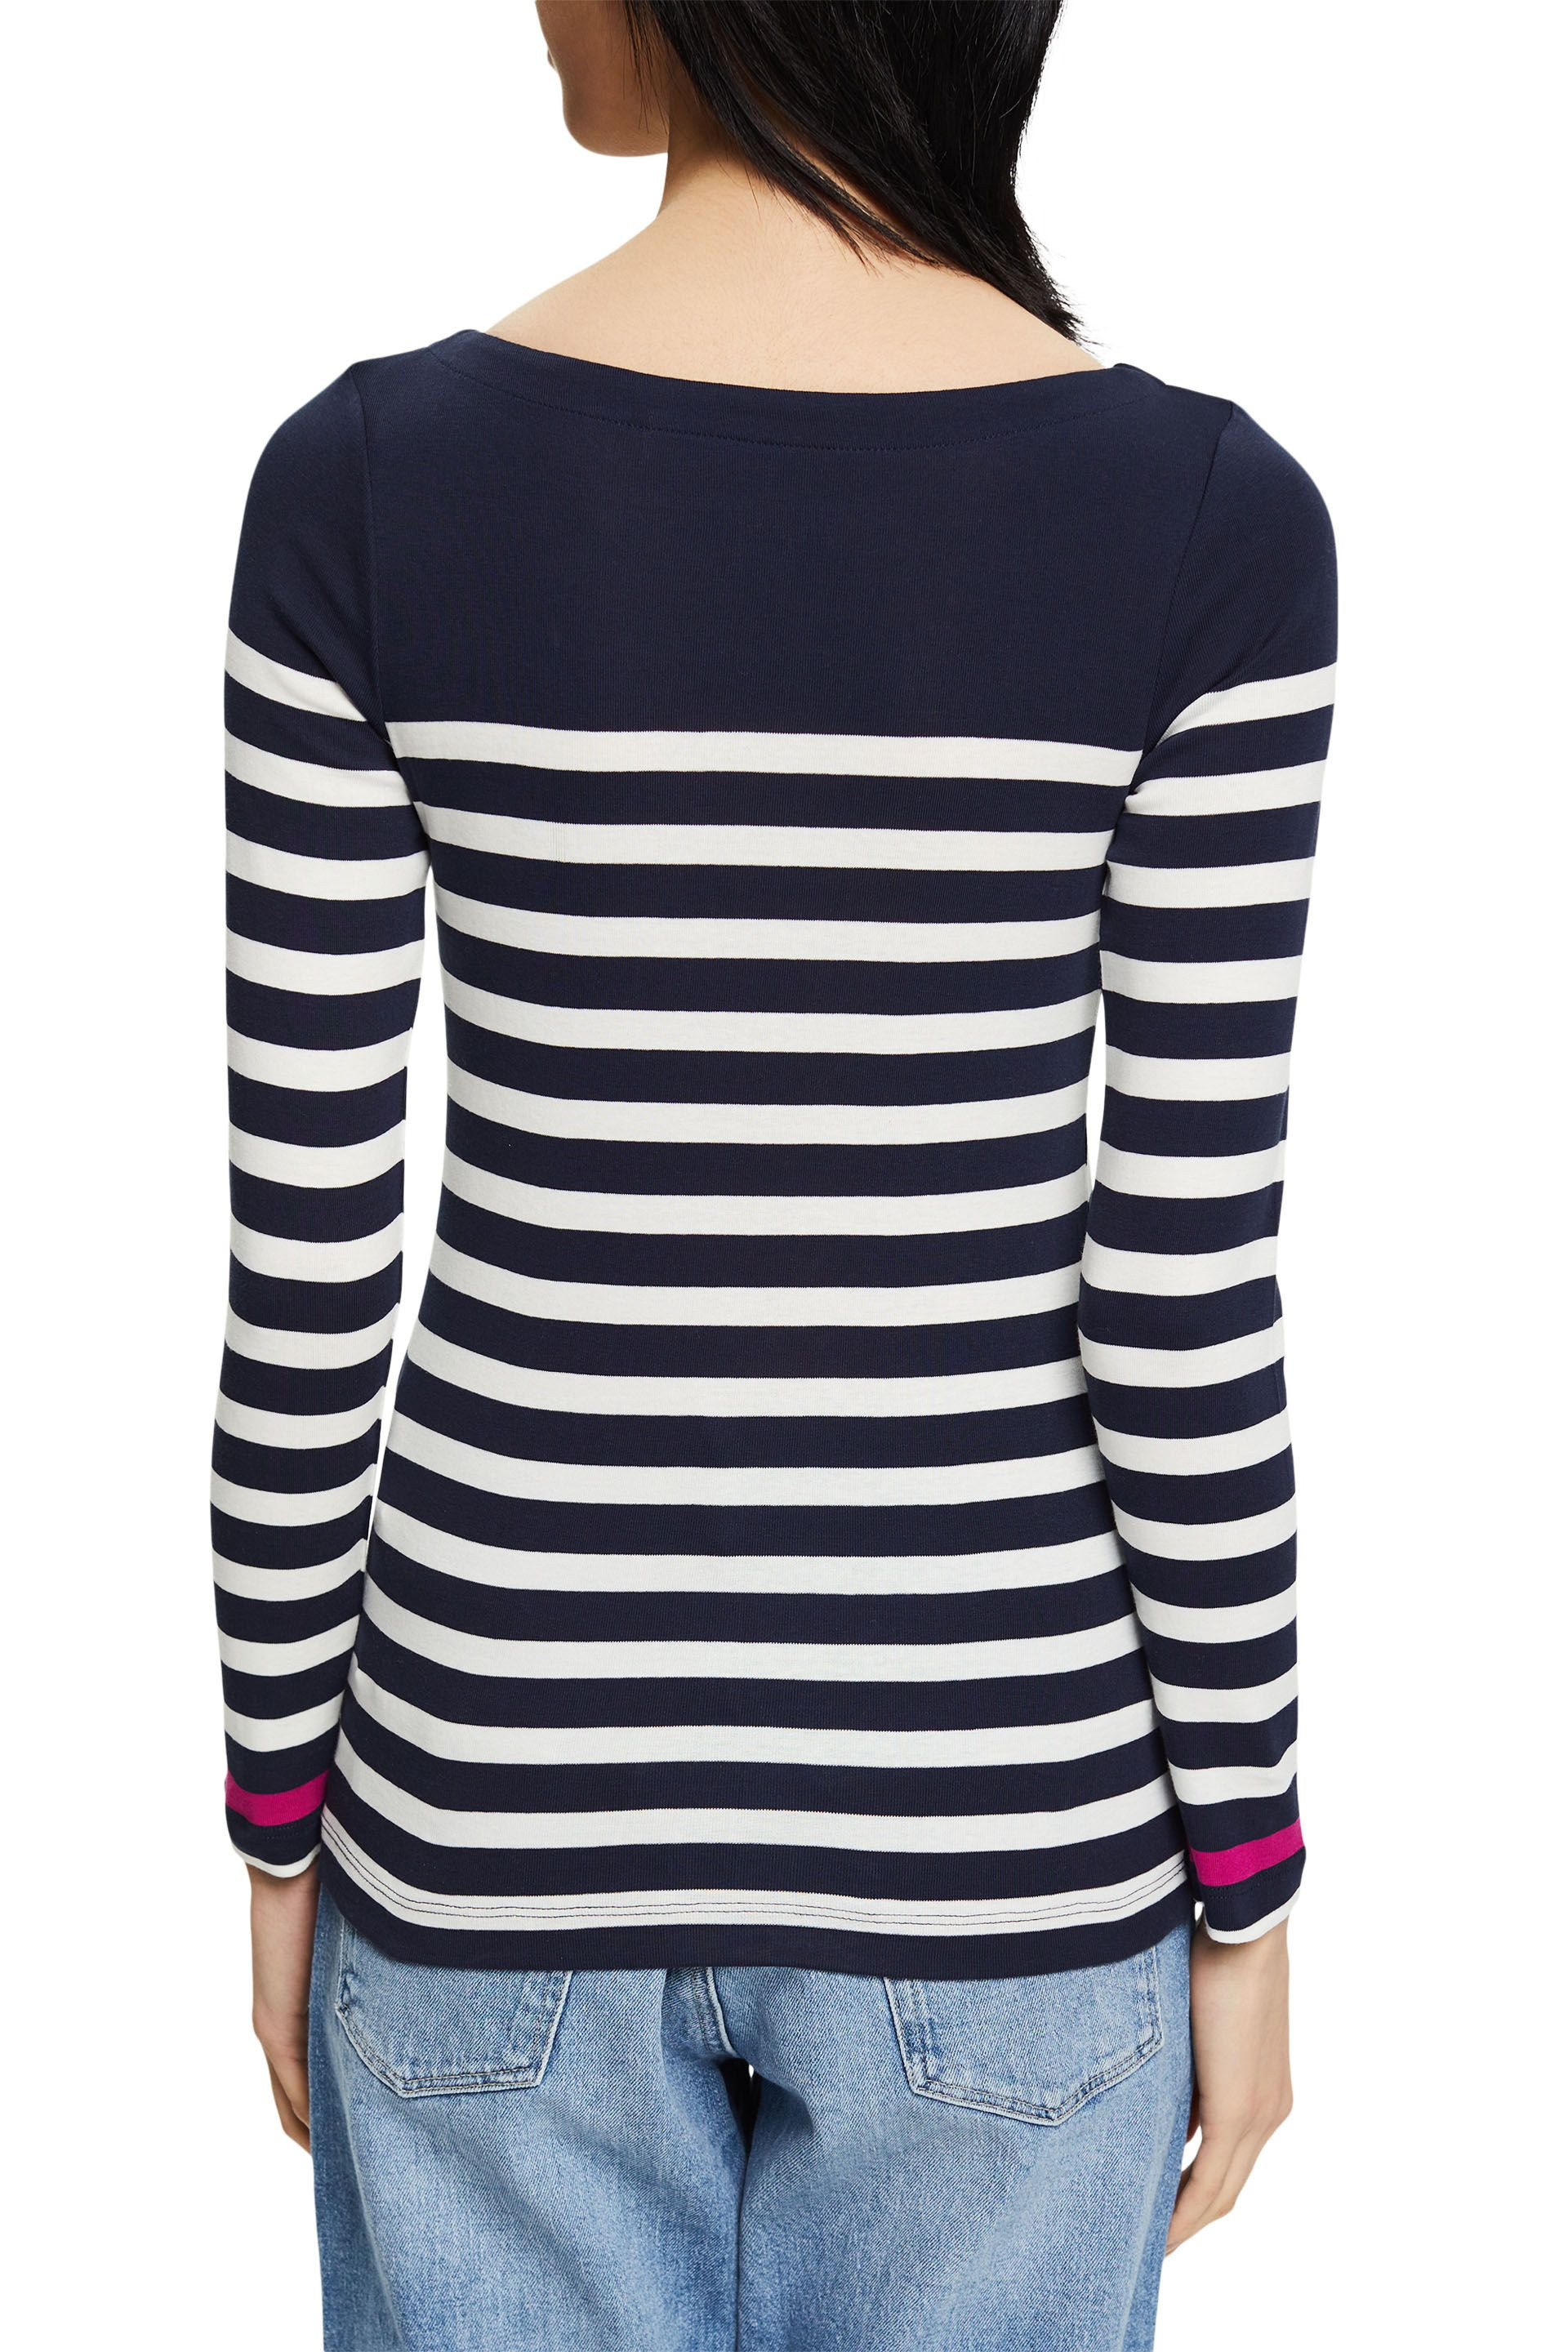 Long-sleeved shirt with marinare striped pattern, Blue, large image number 2